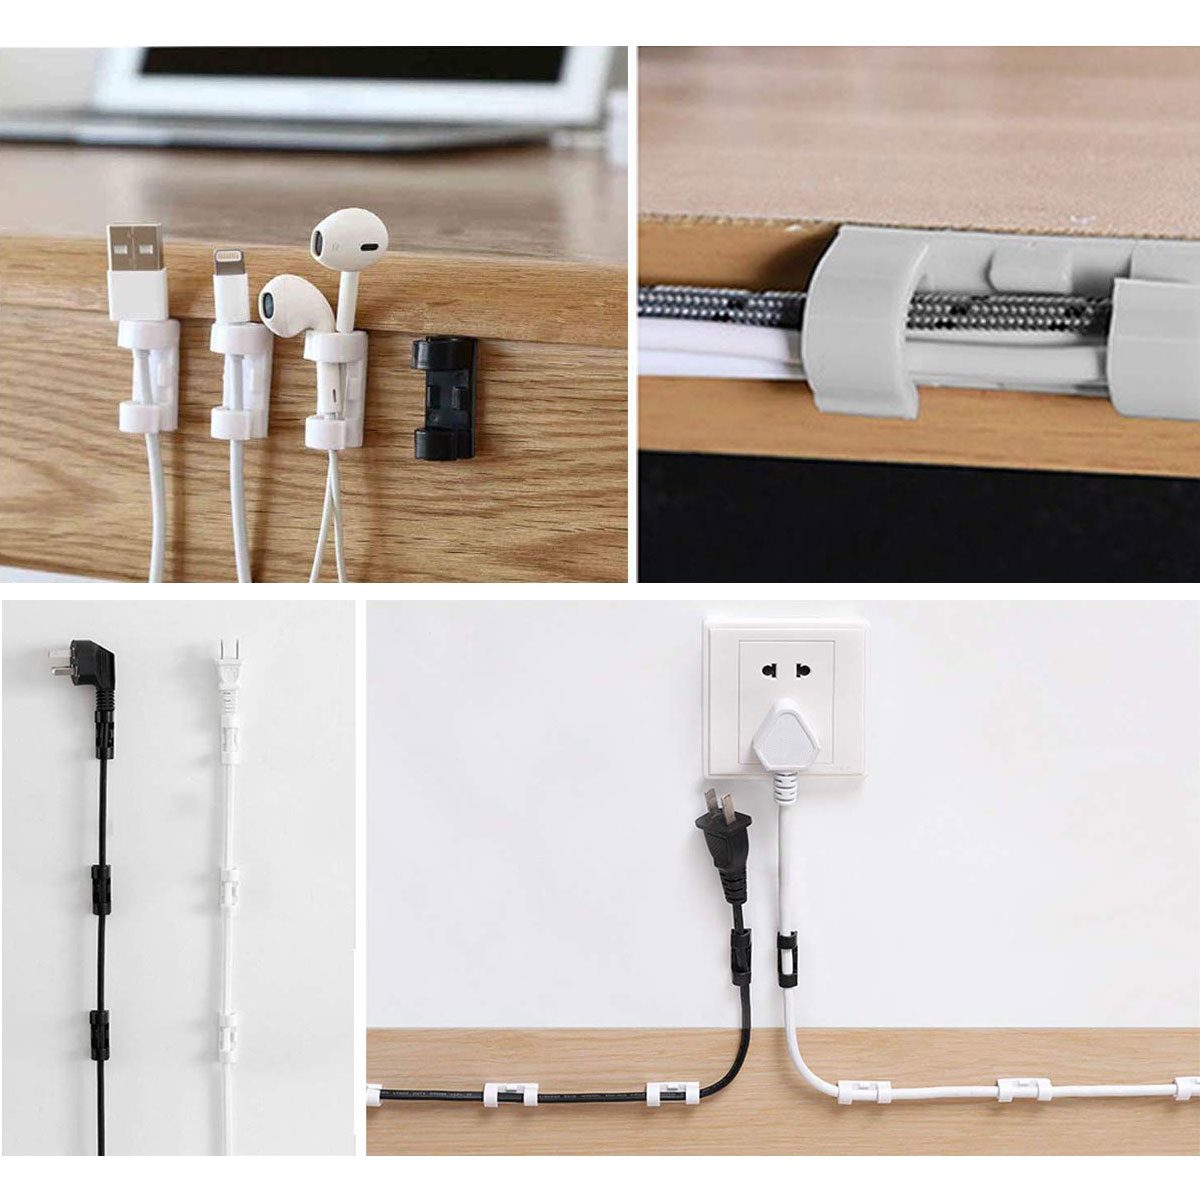 Popular and Novel Cord Management Ideas for your Cubicle